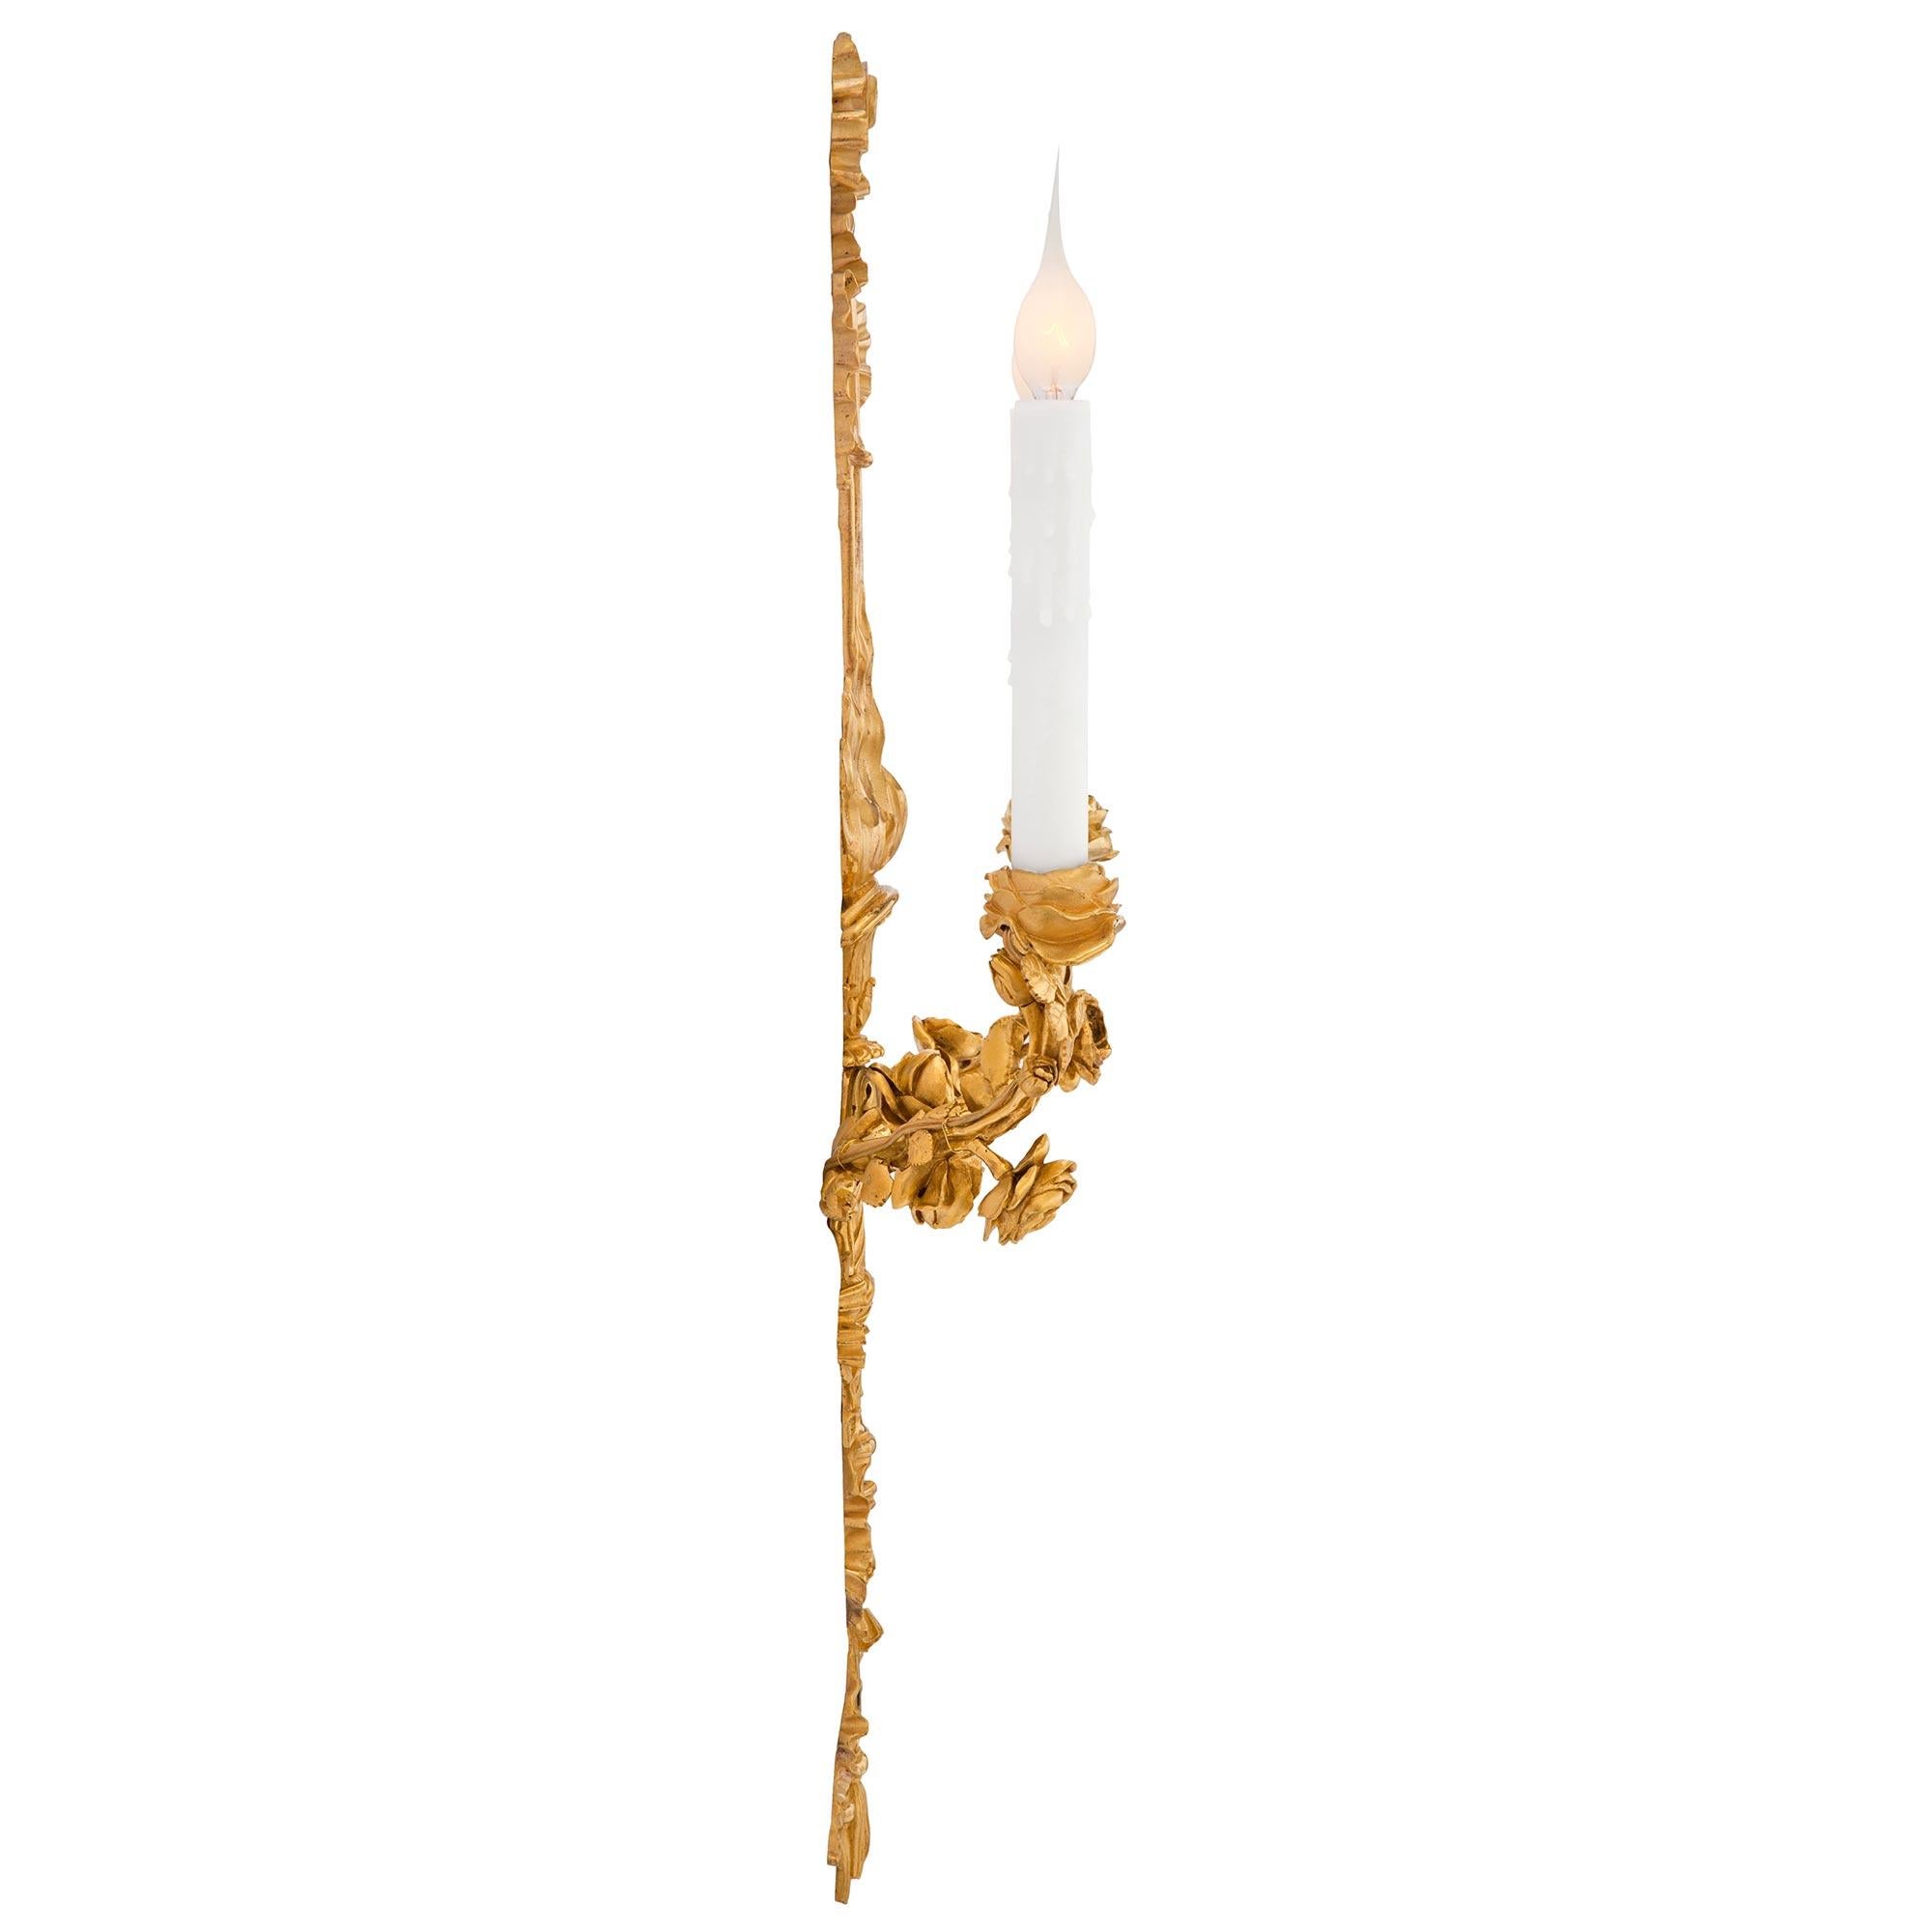 A most elegant and very high quality pair of French 19th century Louis XVI st. ormolu sconces. Each two arm sconce is centered by charming tassels tied with a ribbon below the impressive and finely detailed eternal flame and lovely top ribbon. Each